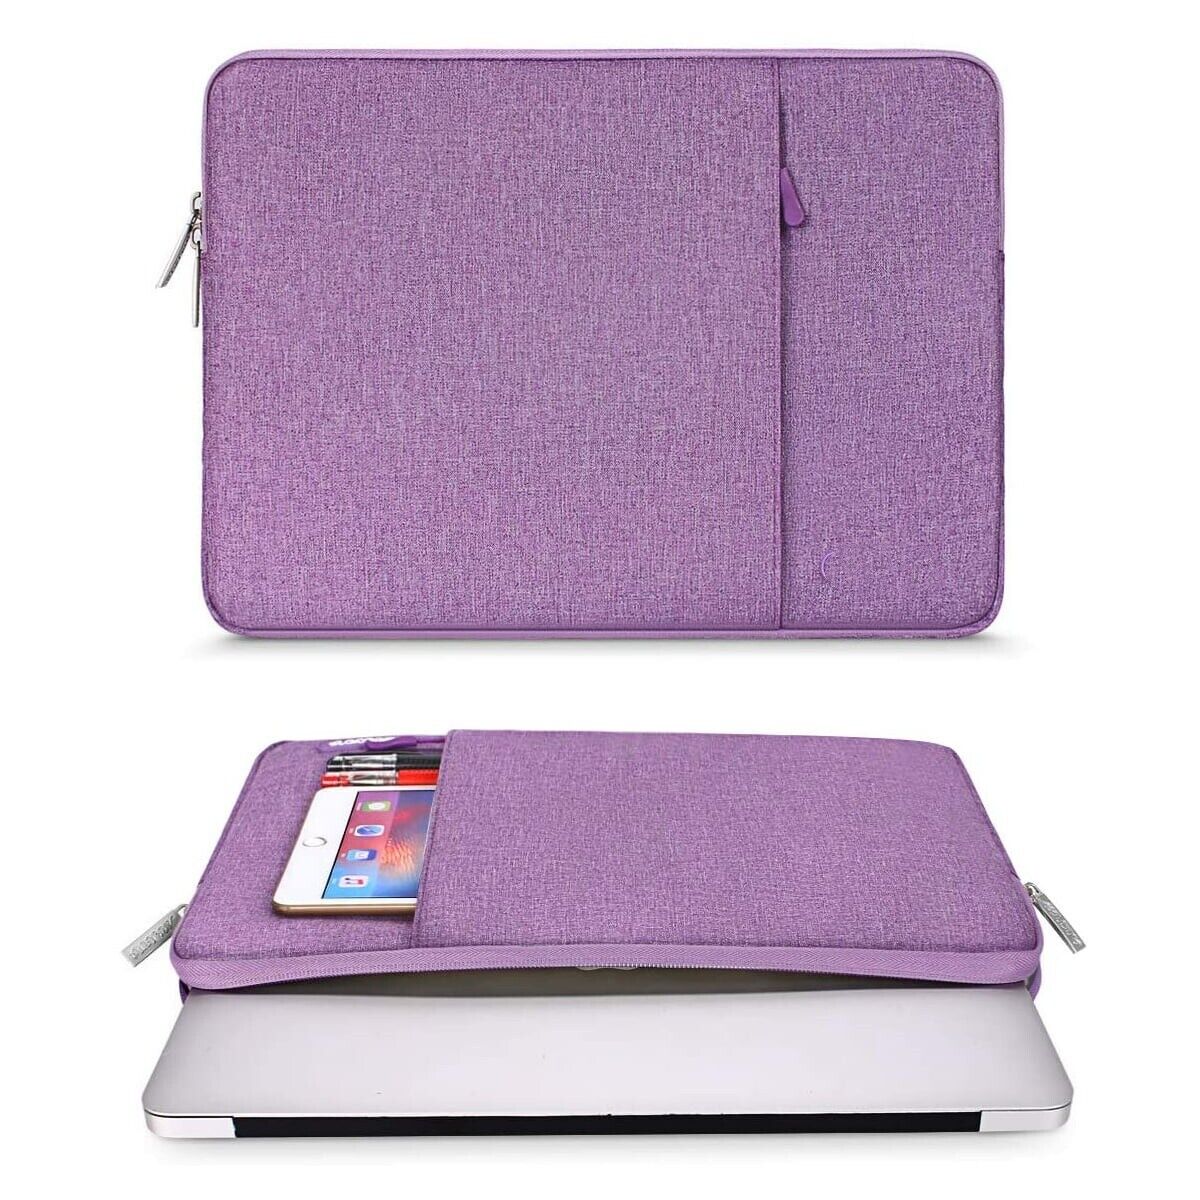 Case Cover Laptop Sleeve Bag Notebook Bag Protective for MacBook13-13.3 inch